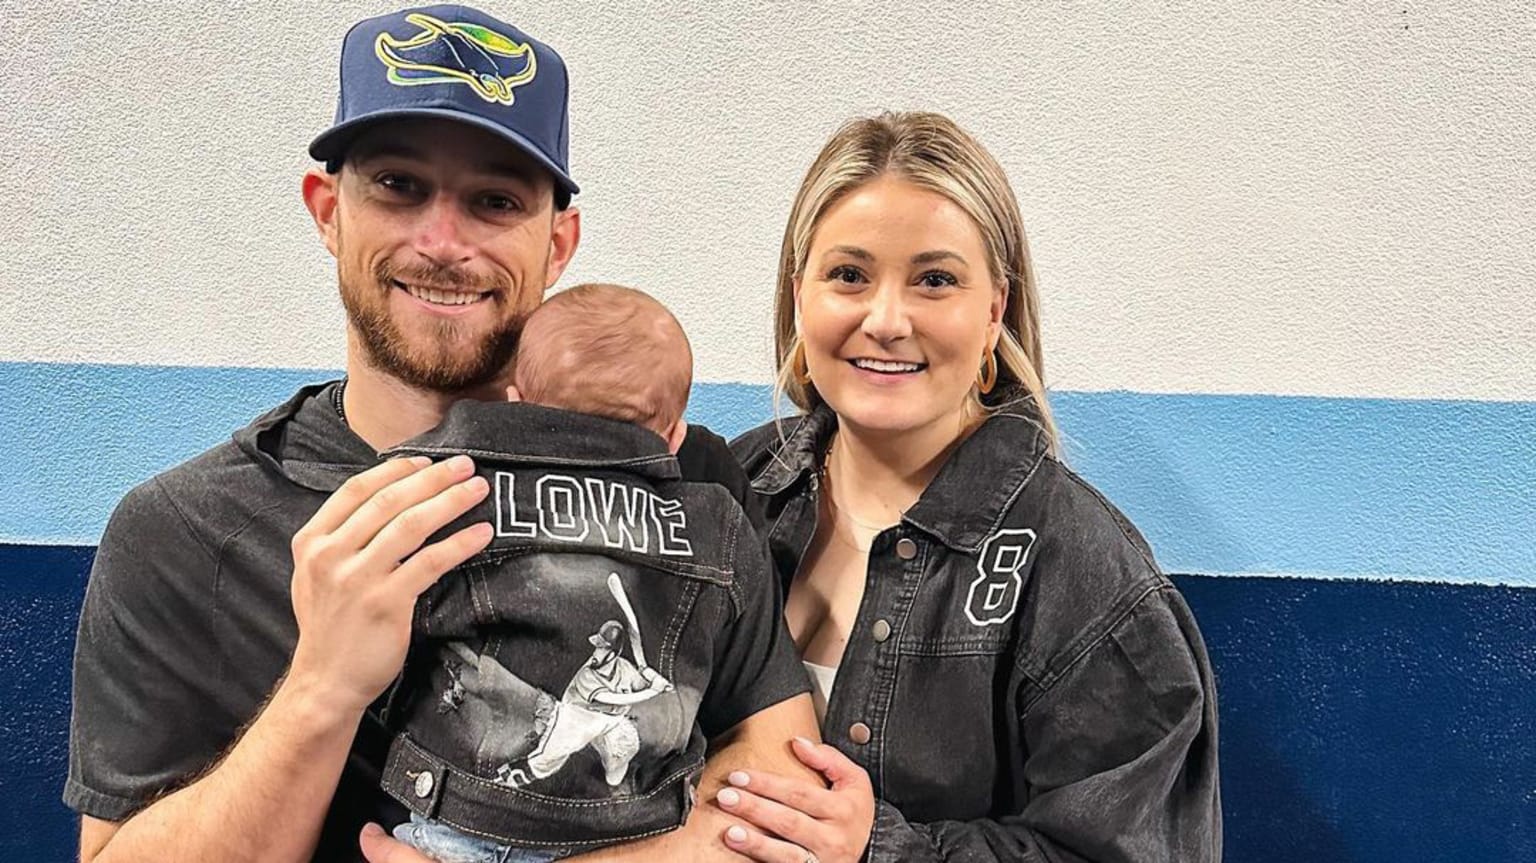 Brandon Lowe poses for a photo with wife Madison and newborn son Emmett Dean